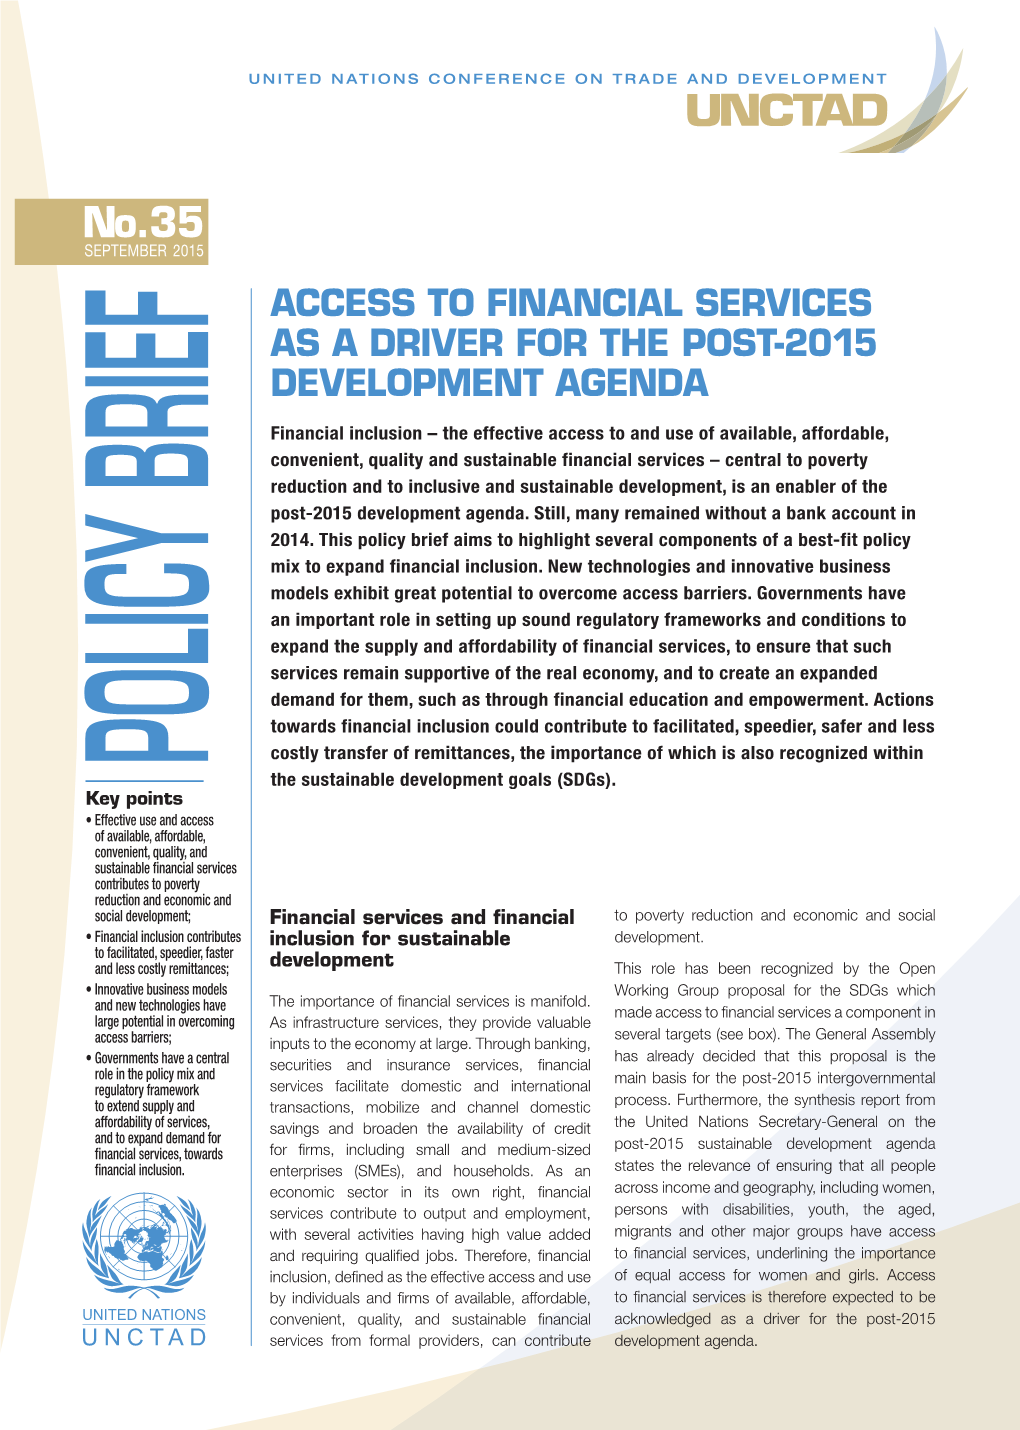 Access to Financial Services As a Driver for the Post-2015 Development Agenda